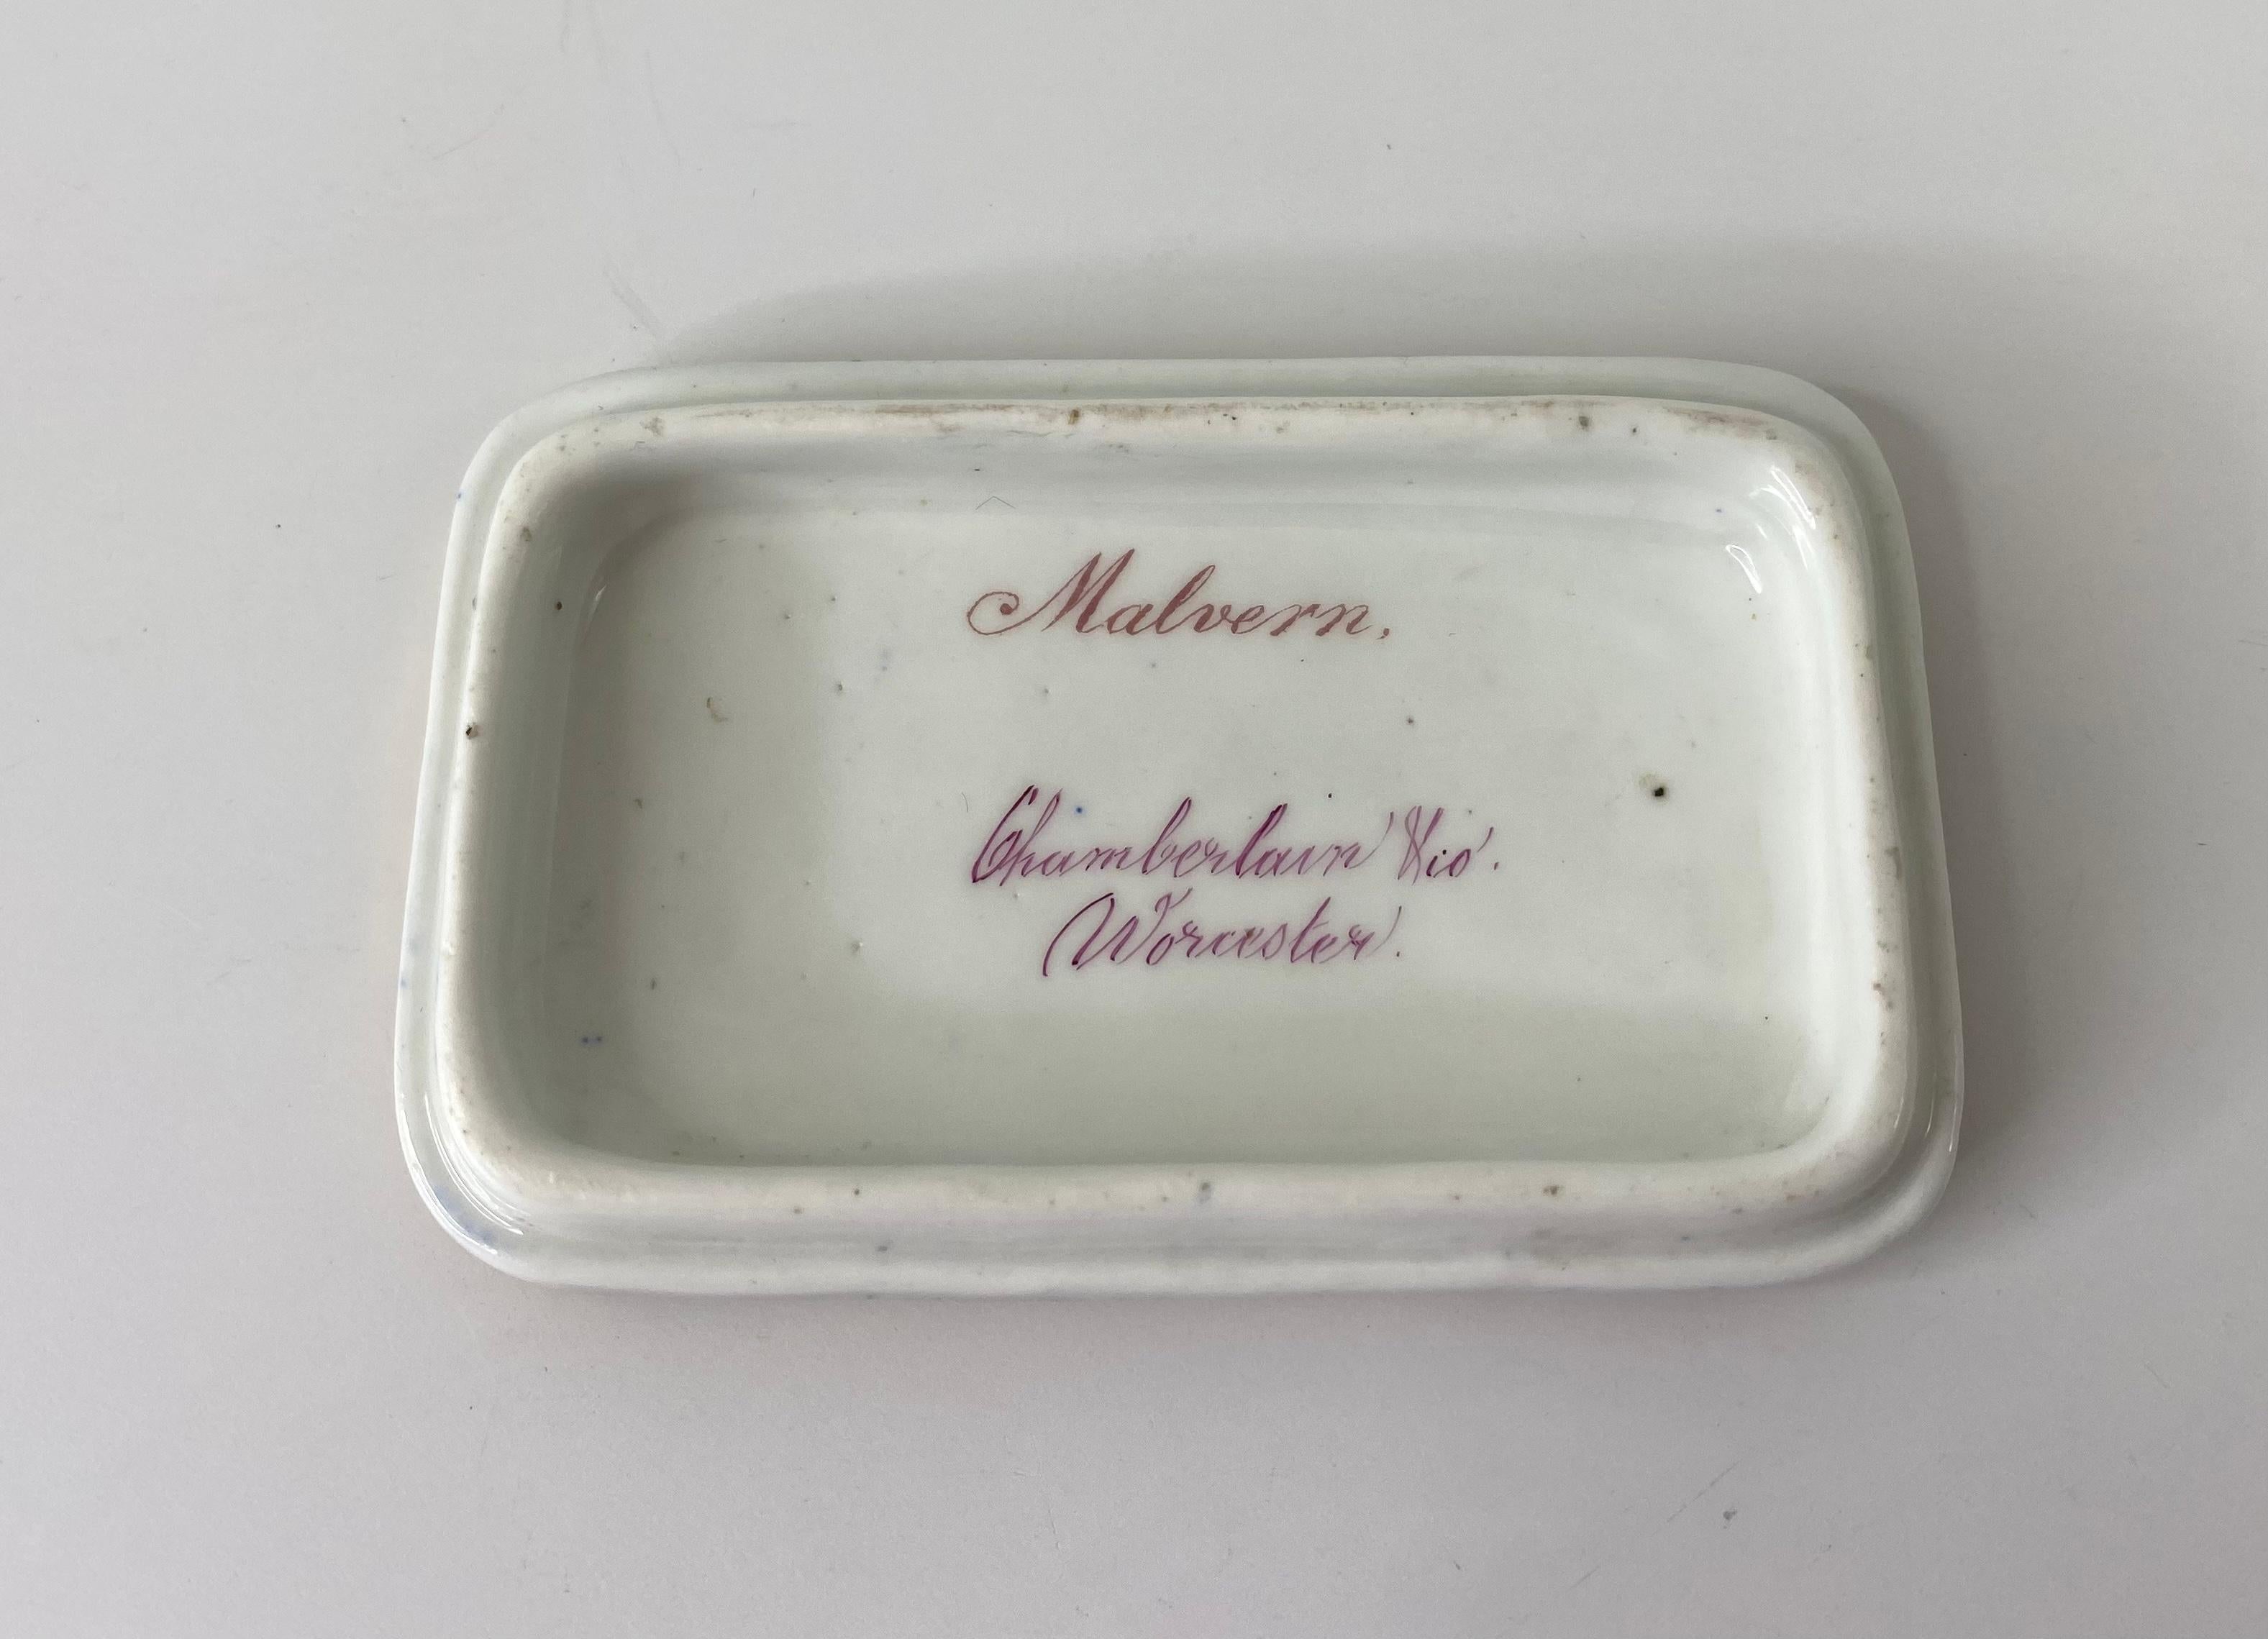 Chamberlain Worcester Porcelain Box and Cover, ‘Malvern’, c. 1840 In Excellent Condition For Sale In Gargrave, North Yorkshire